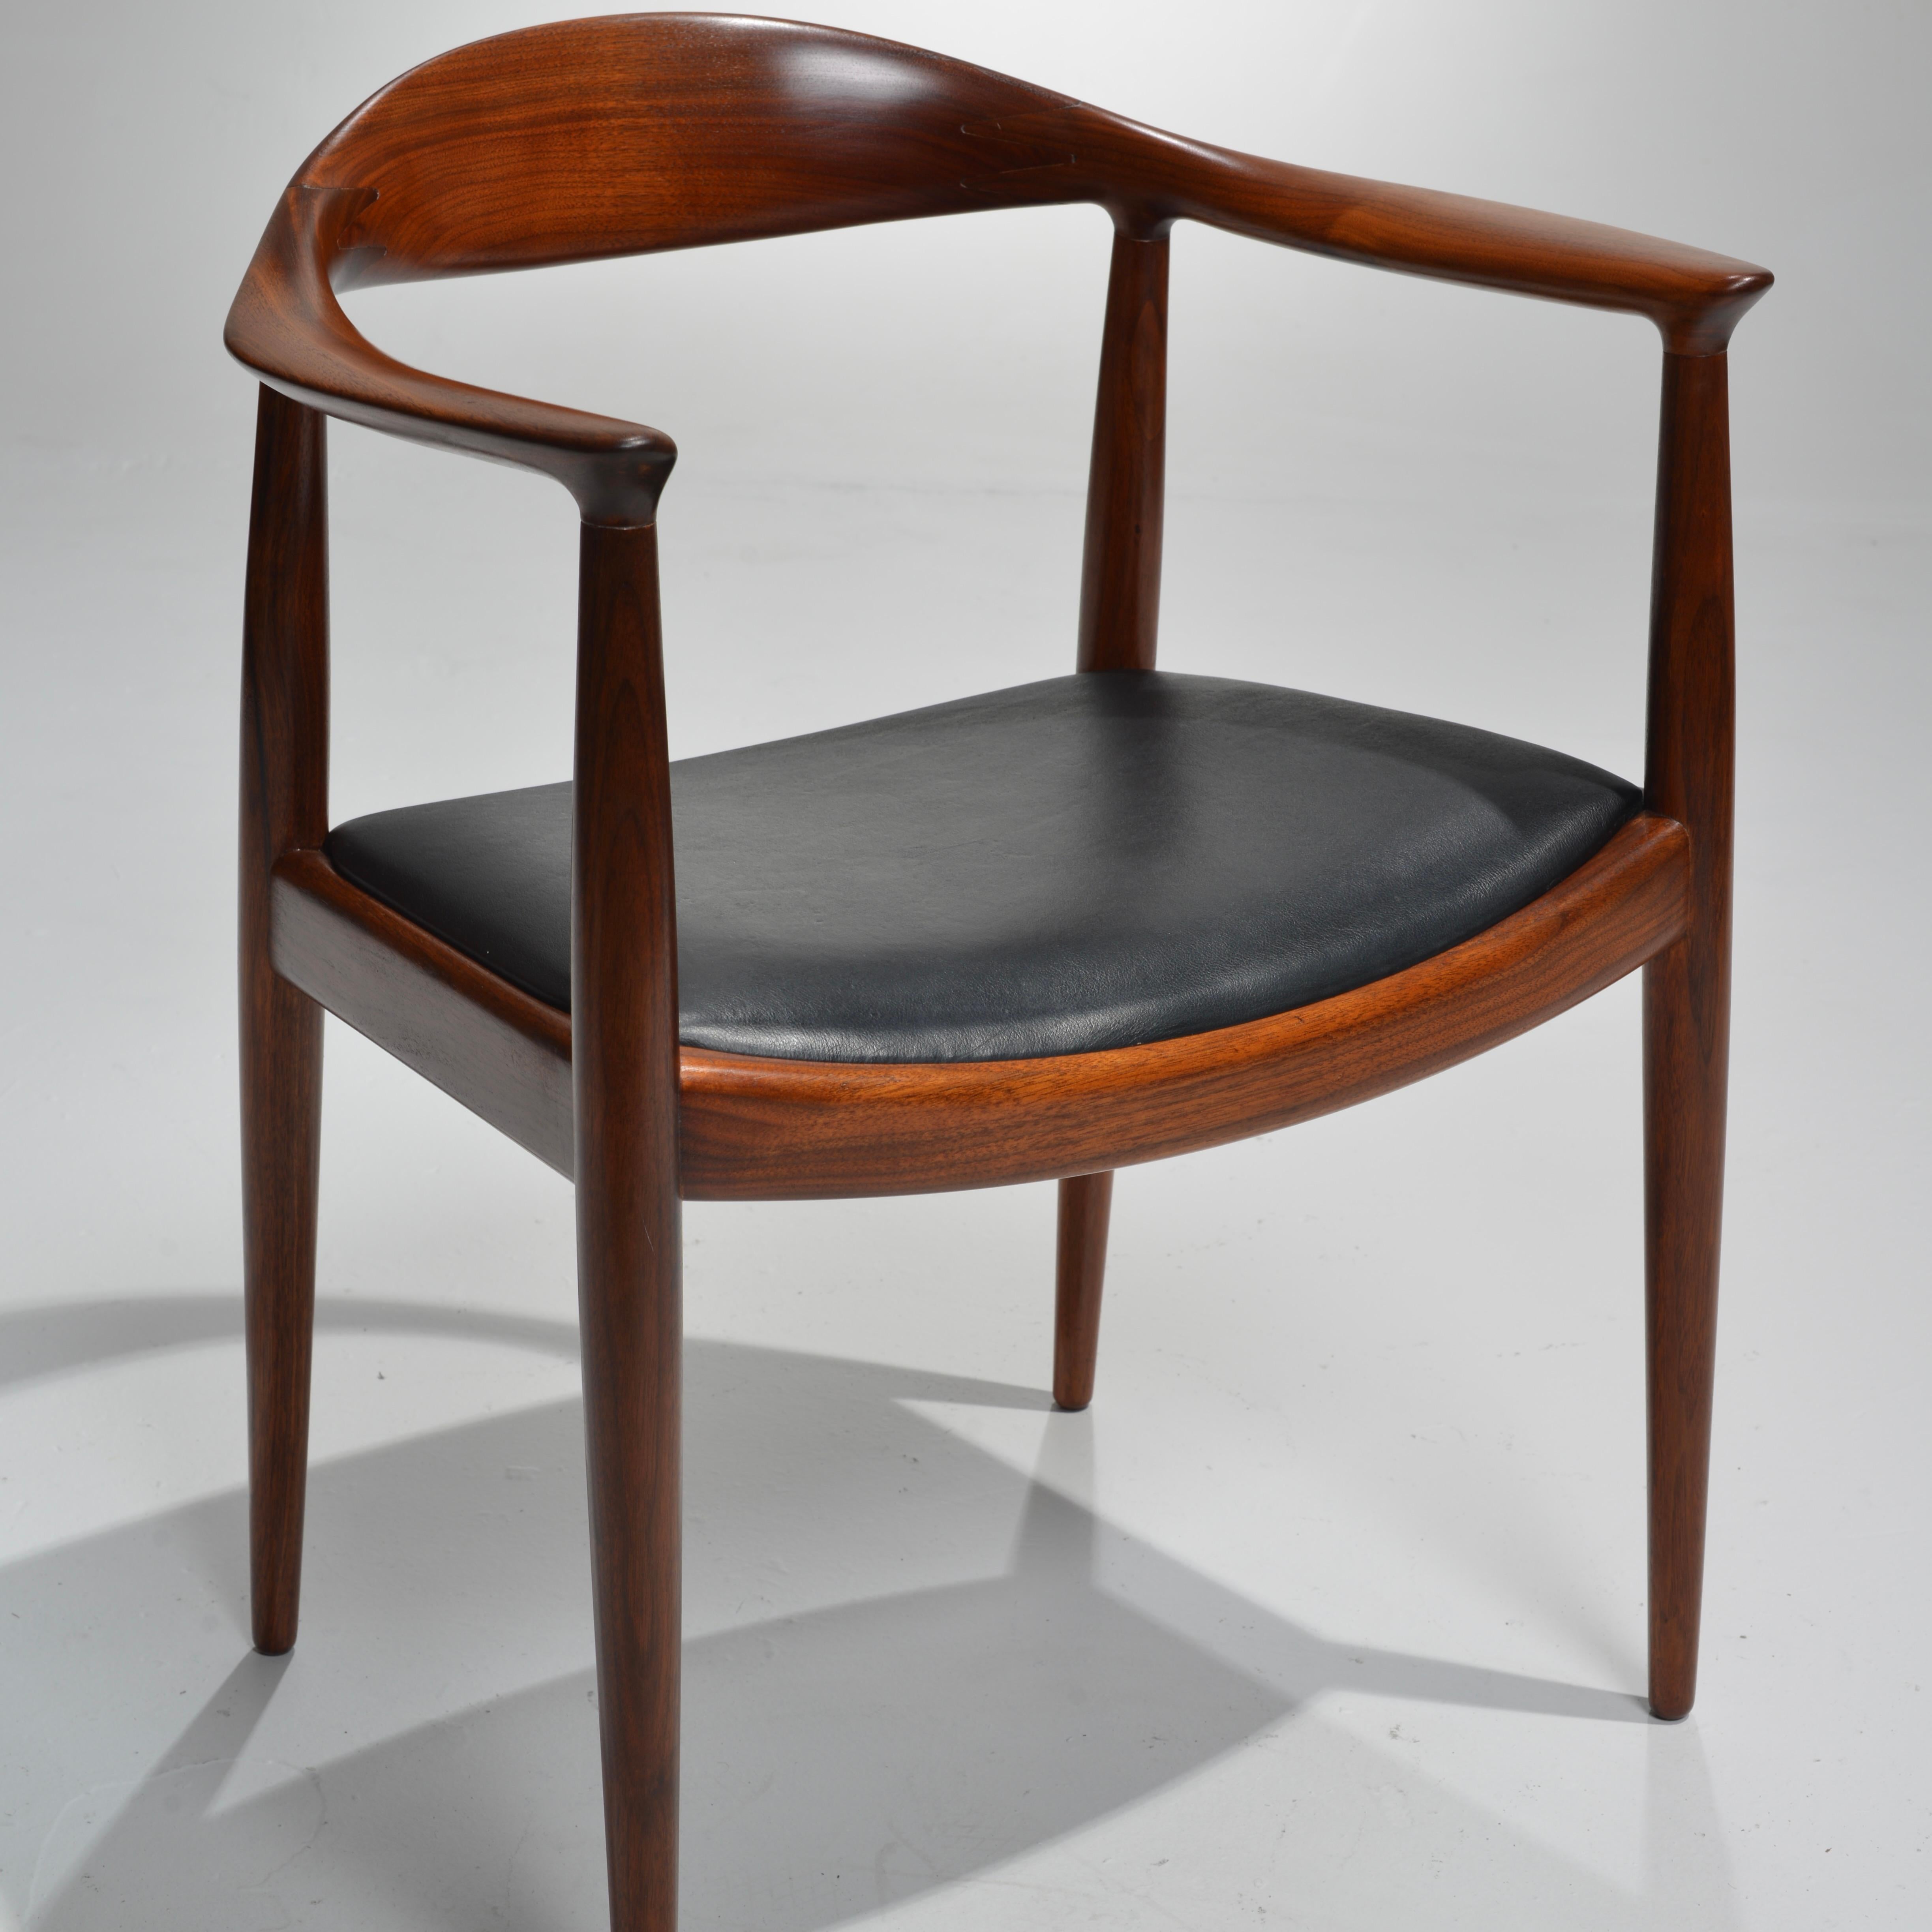  8 Hans Wegner for Johannes Hansen JH-503 Chairs in Walnut and Leather For Sale 3